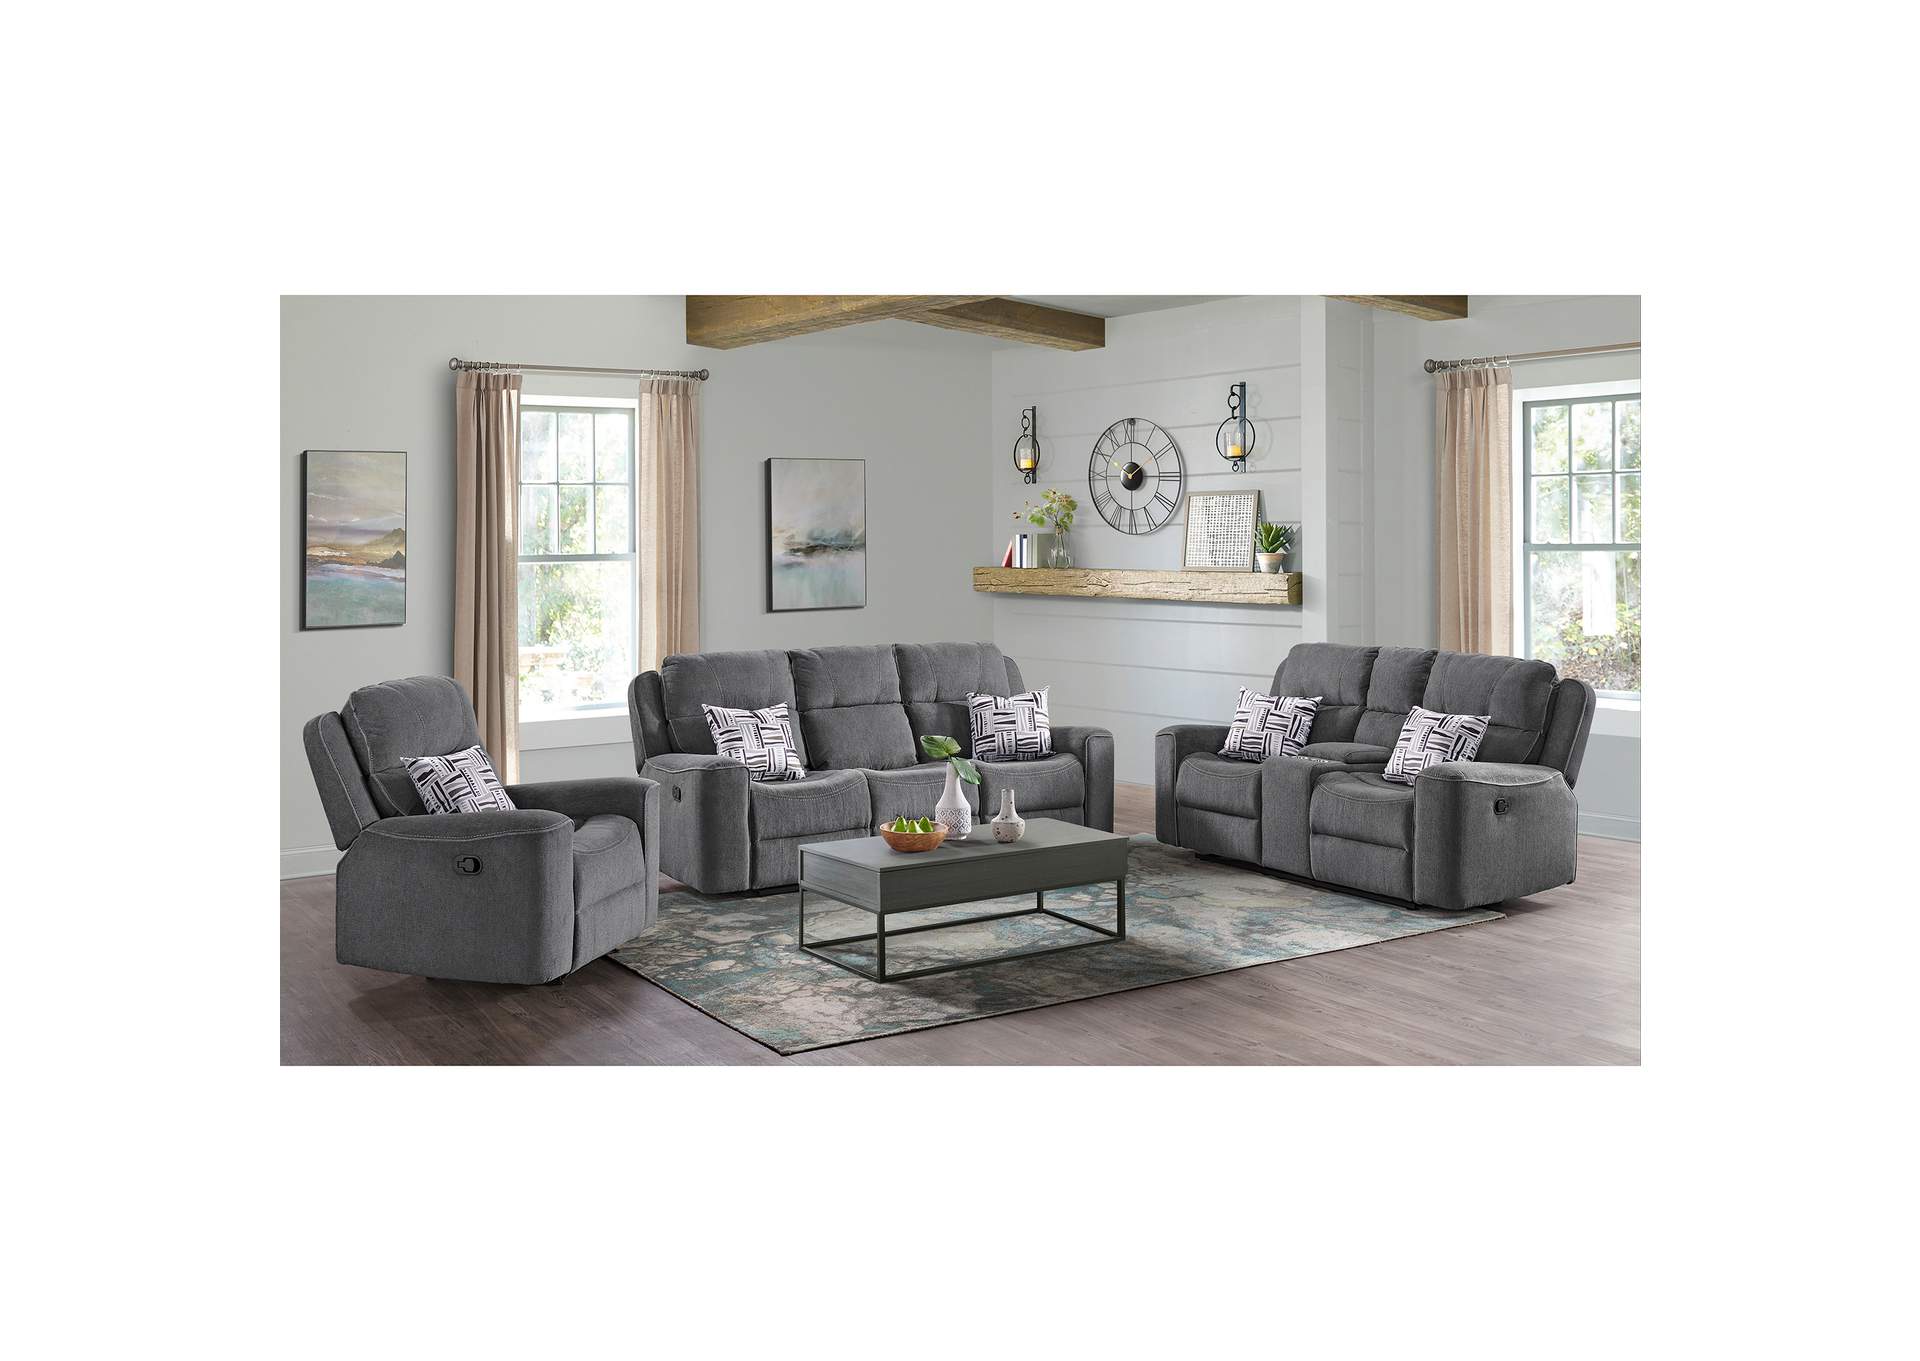 Connery Motion Loveseat With Console In Pewter,Elements